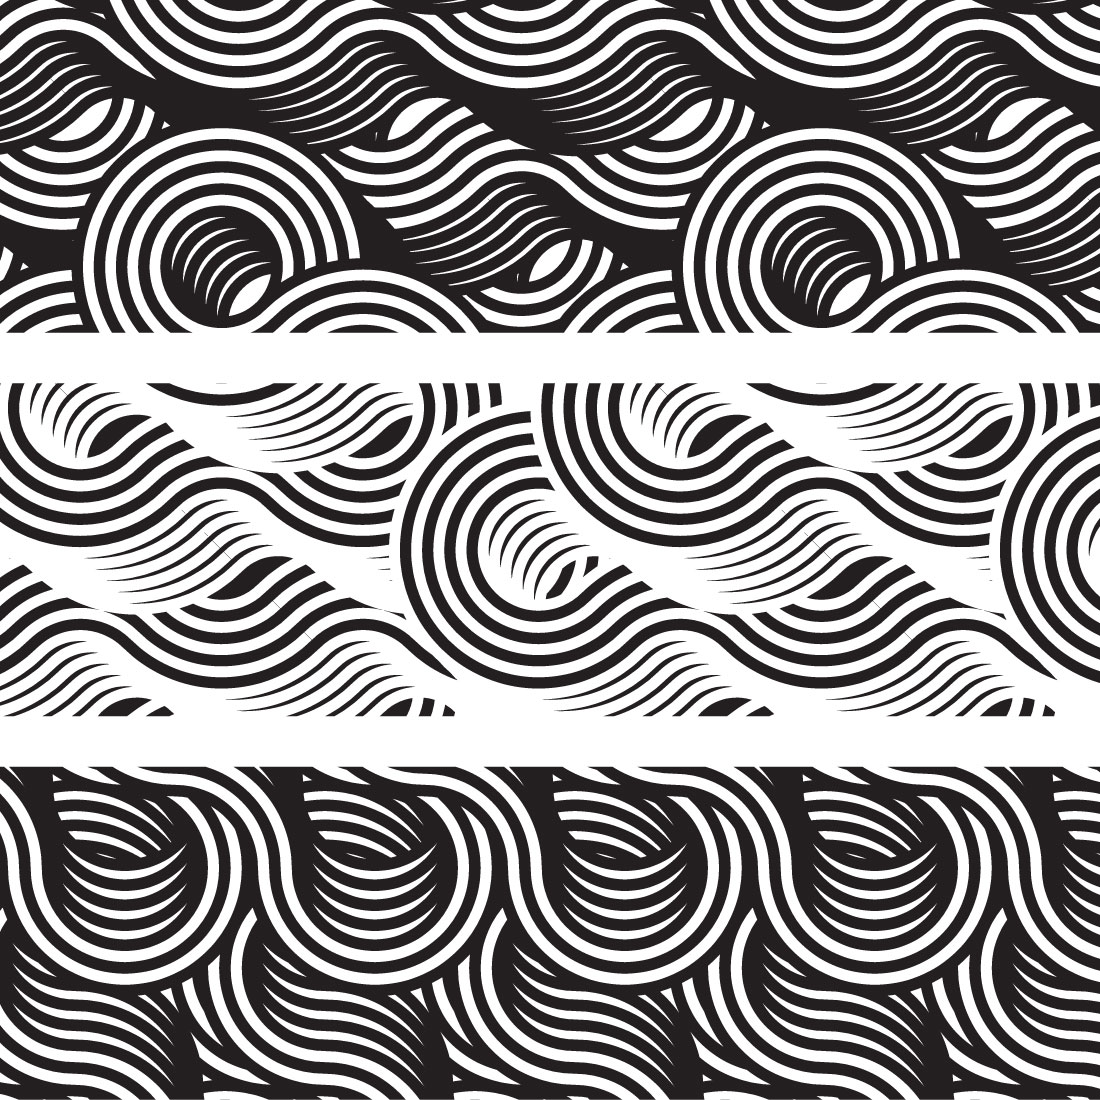 Retro Lines Abstract Patterns cover image.